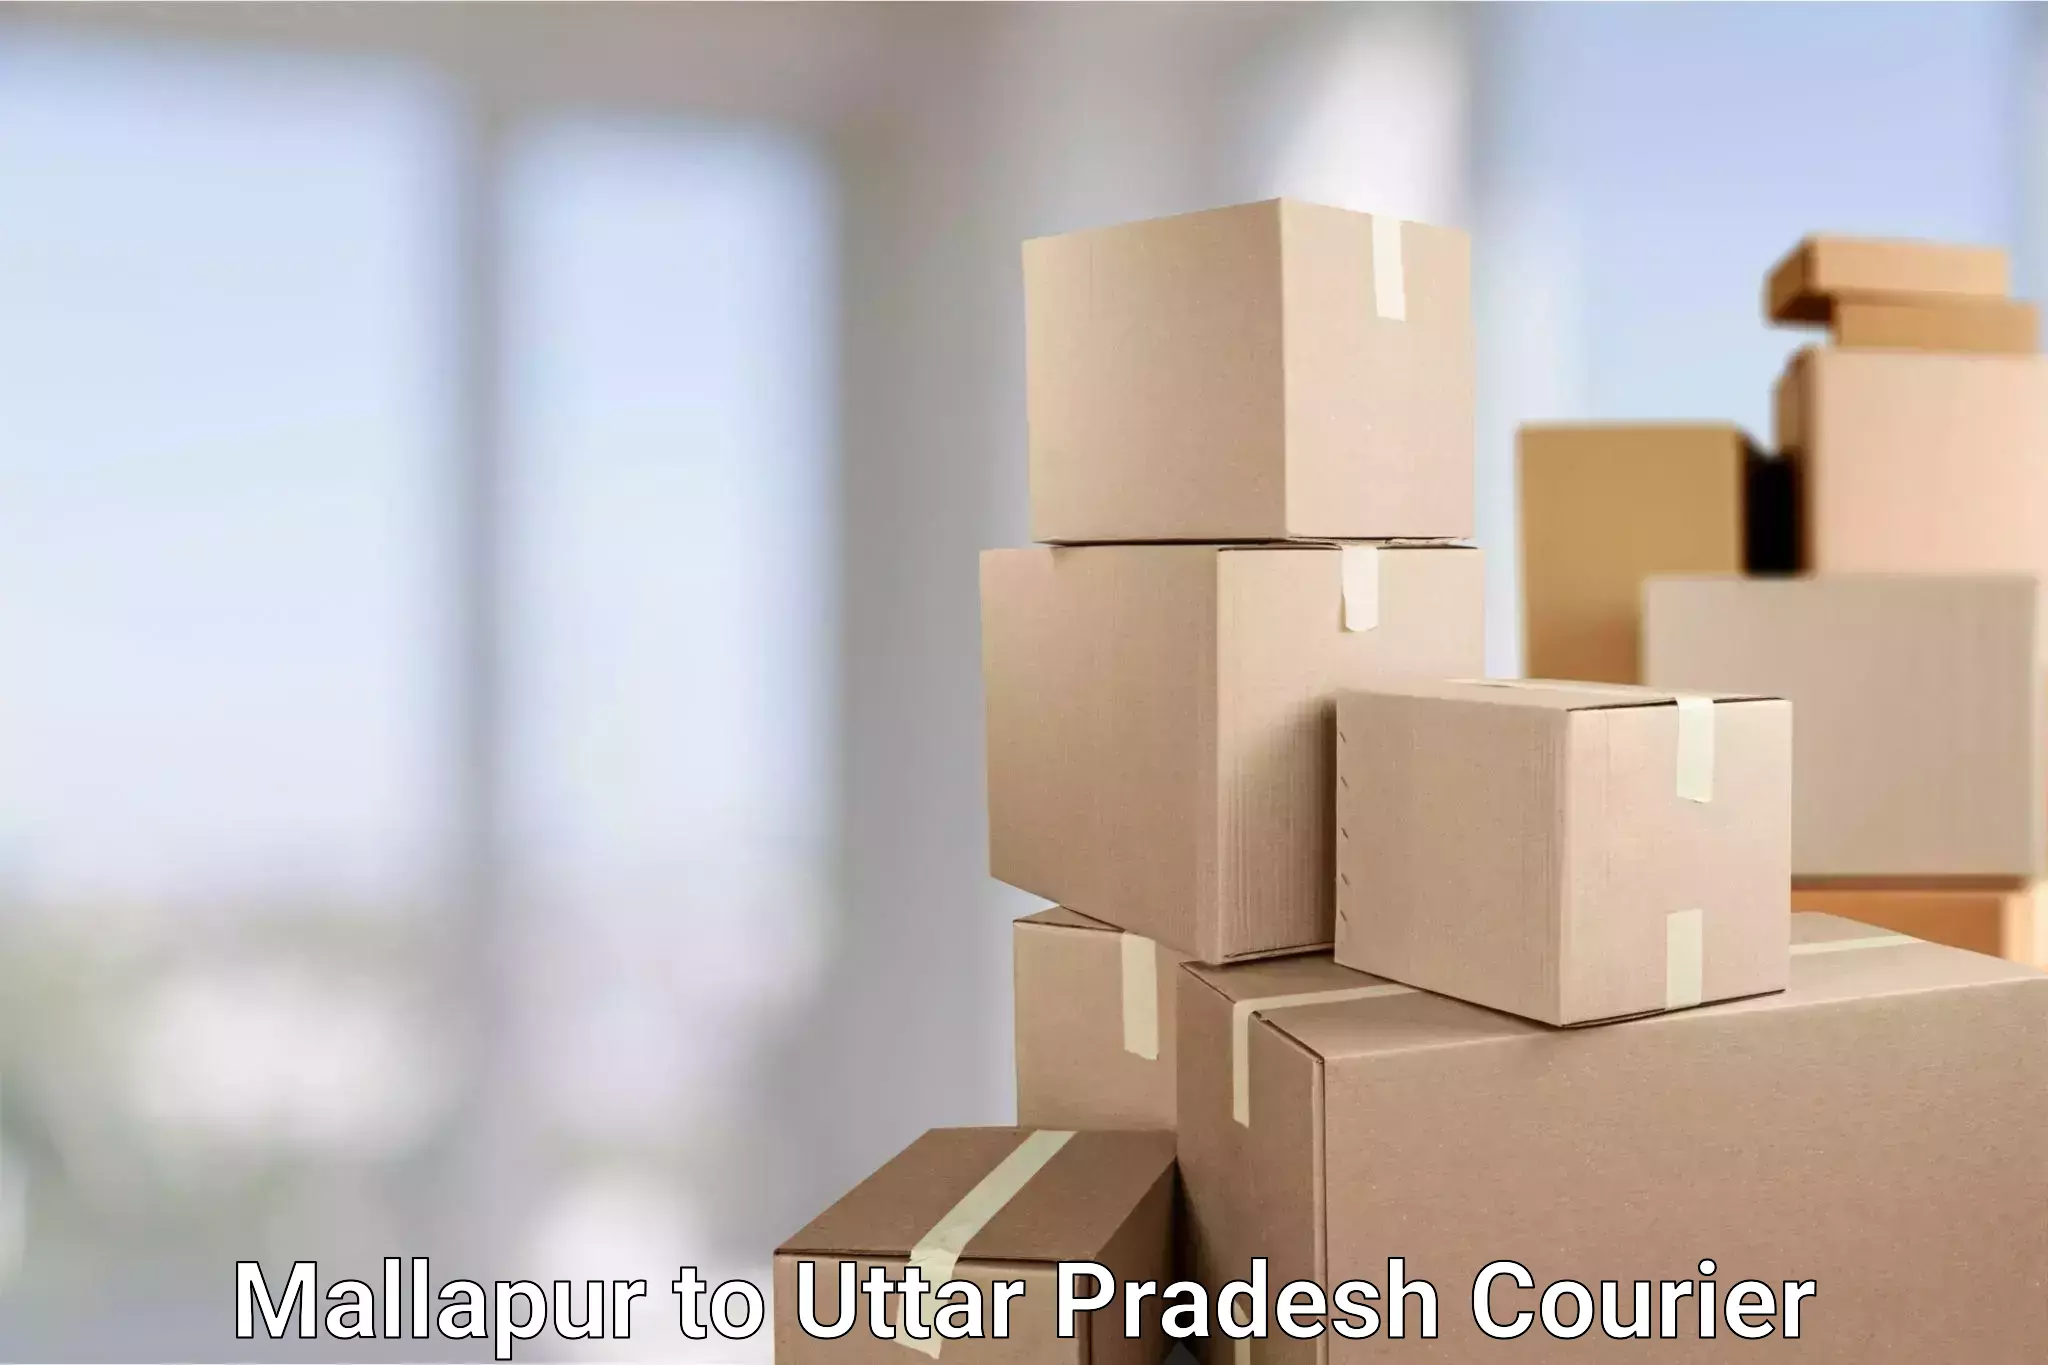 Same-day delivery options Mallapur to Anupshahar